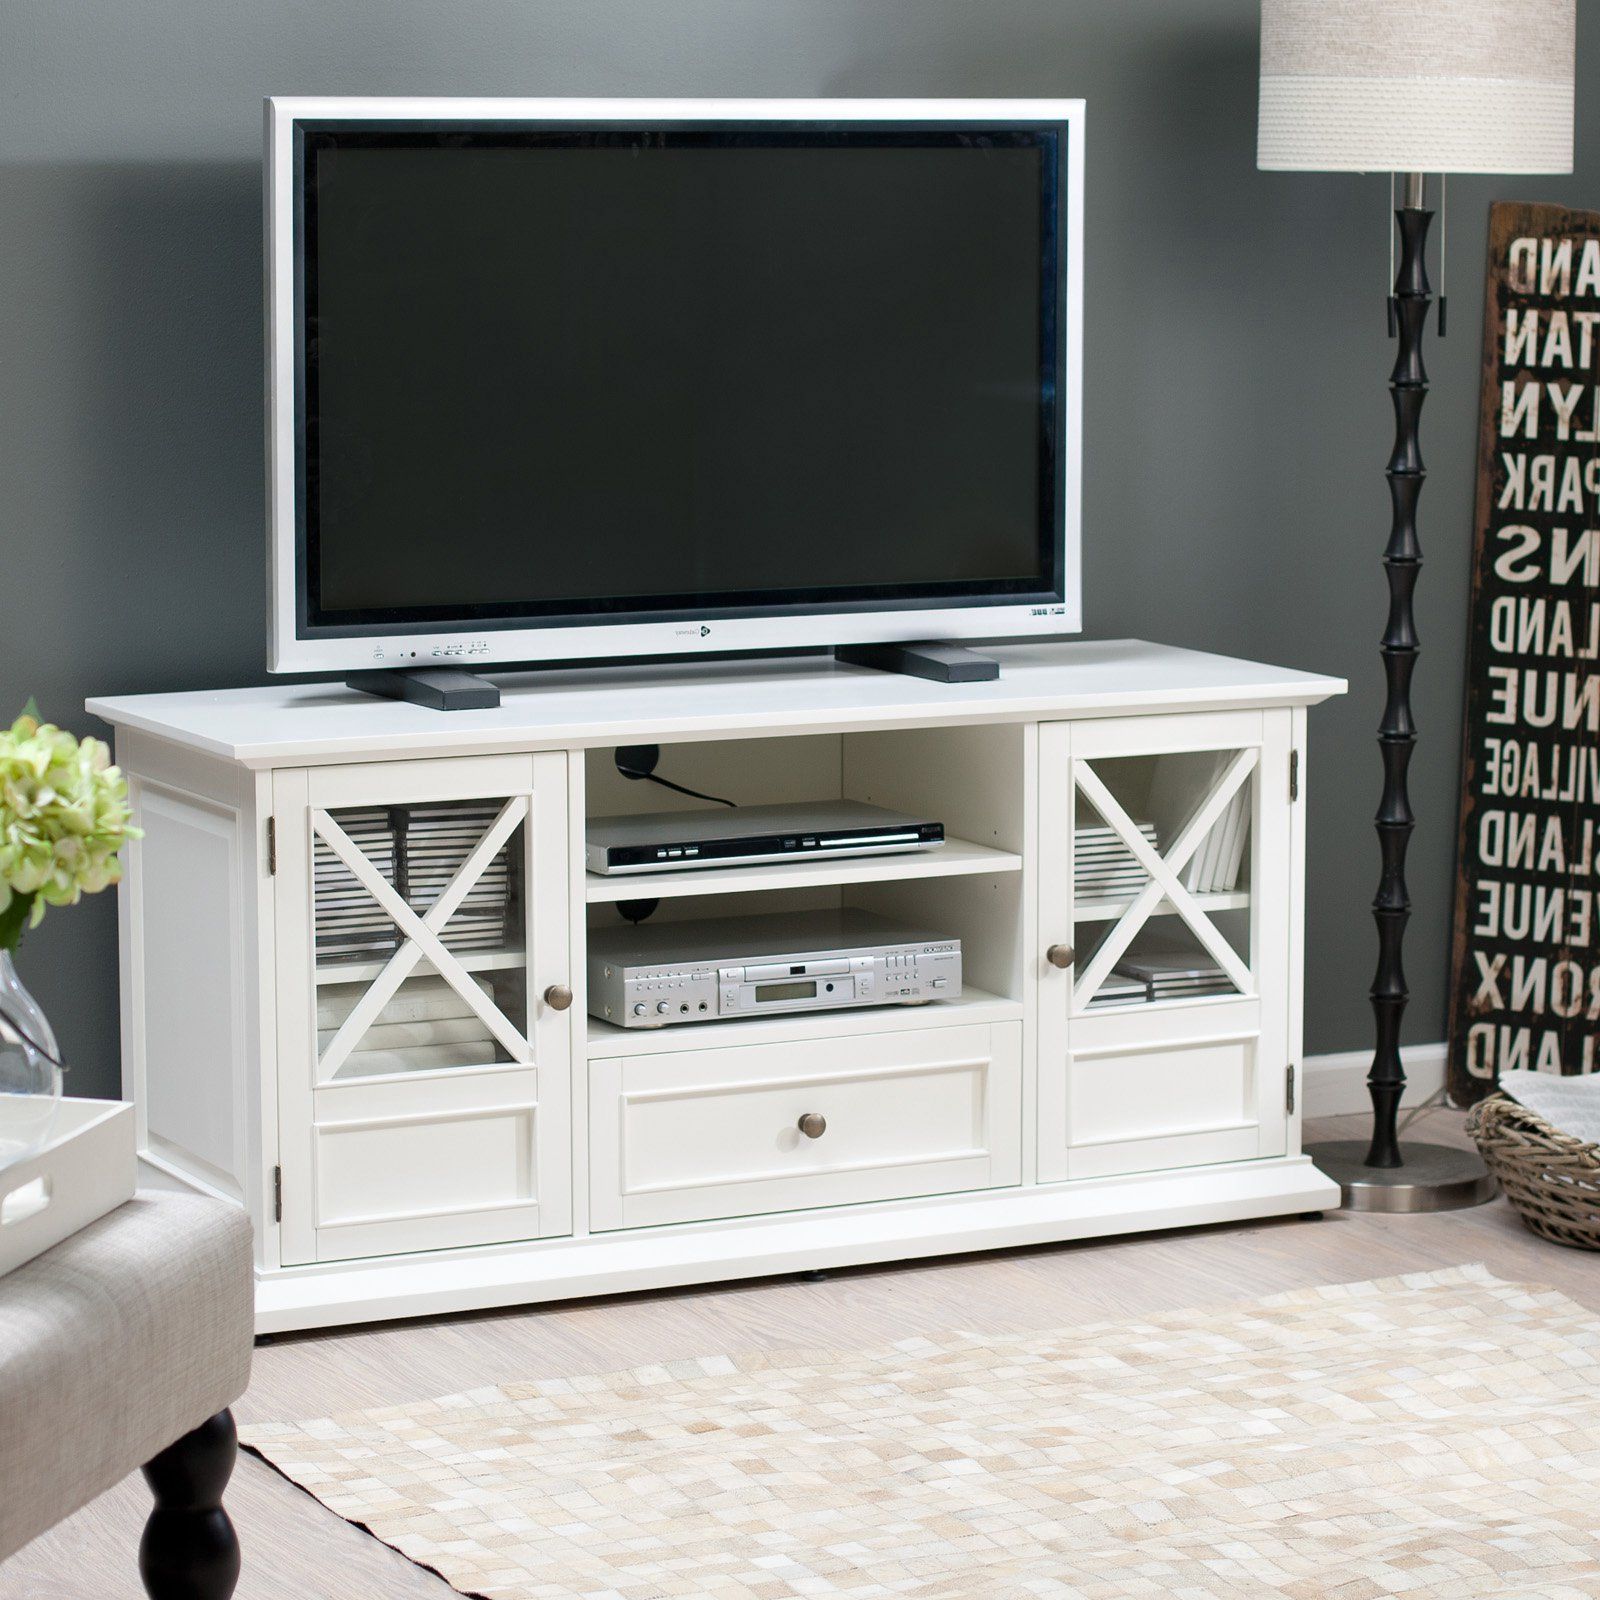 Tv Stands & Entertainment Centers | Hayneedle Throughout Laurent 50 Inch Tv Stands (View 18 of 20)